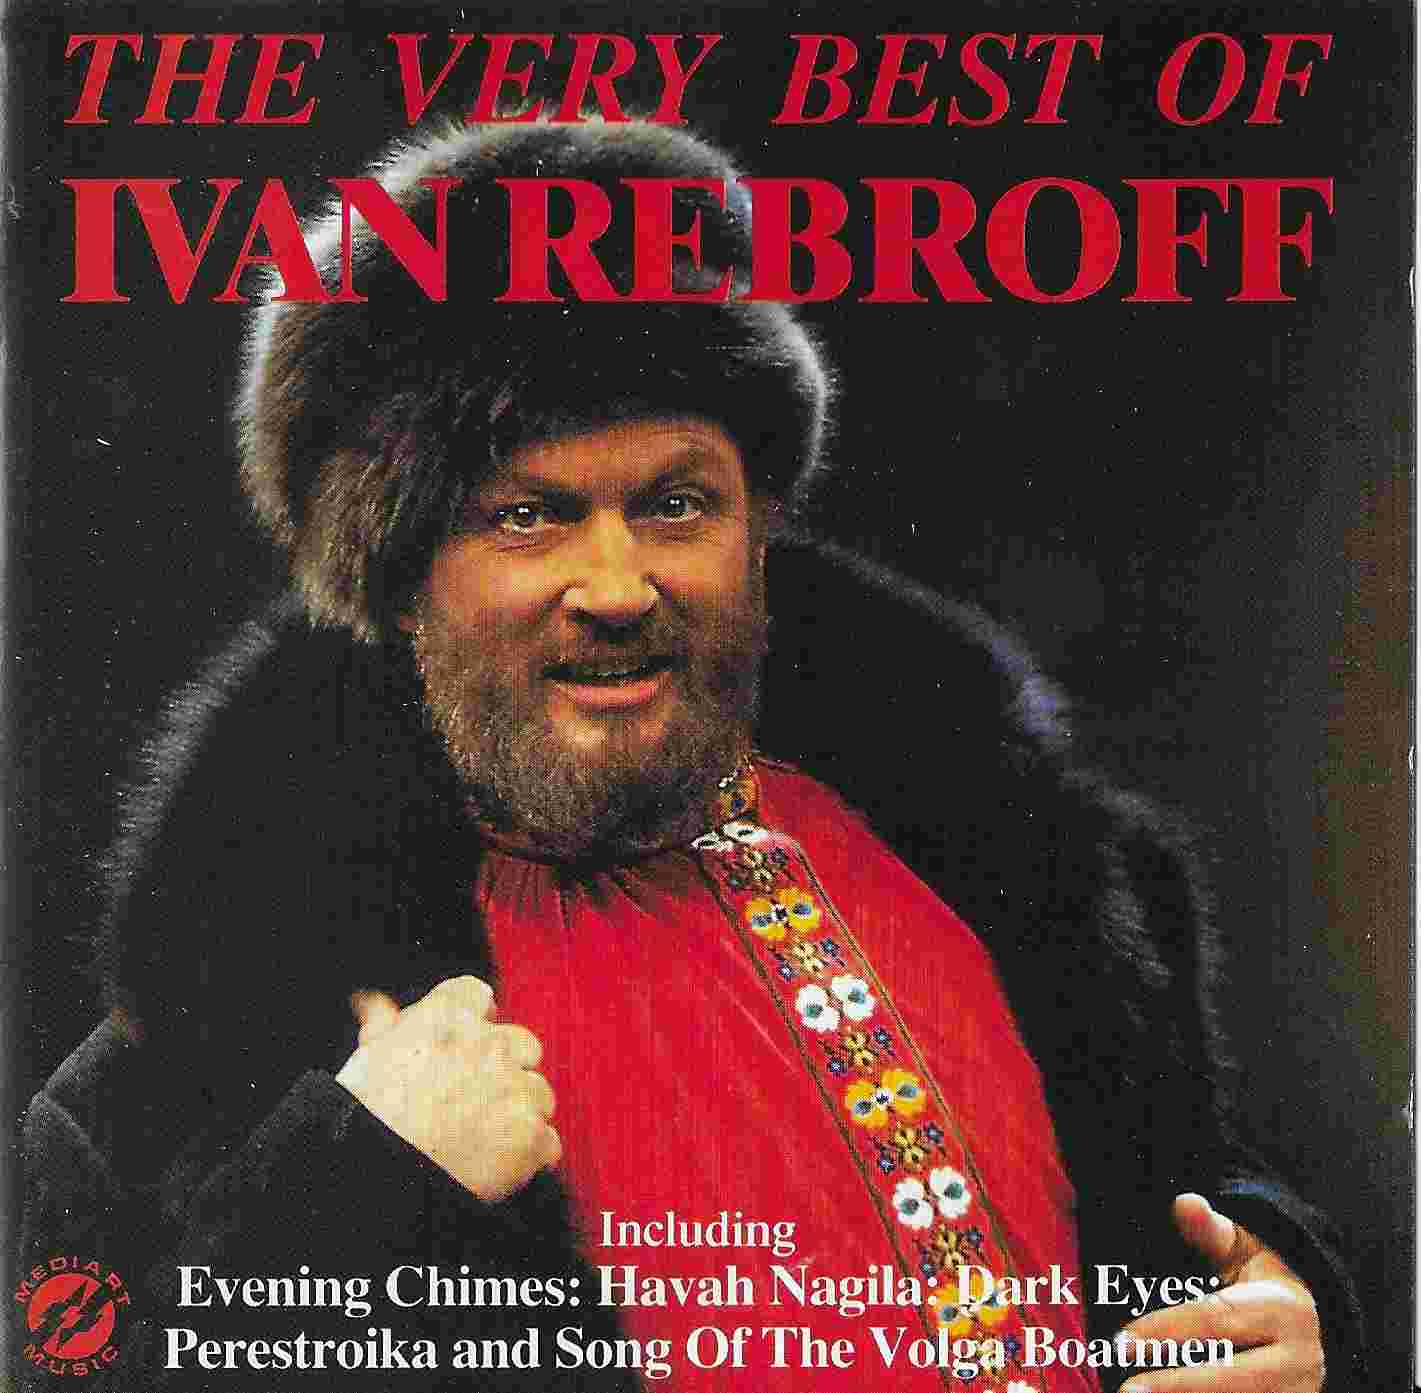 Picture of The very best of Ivan Rebroff by artist Various 